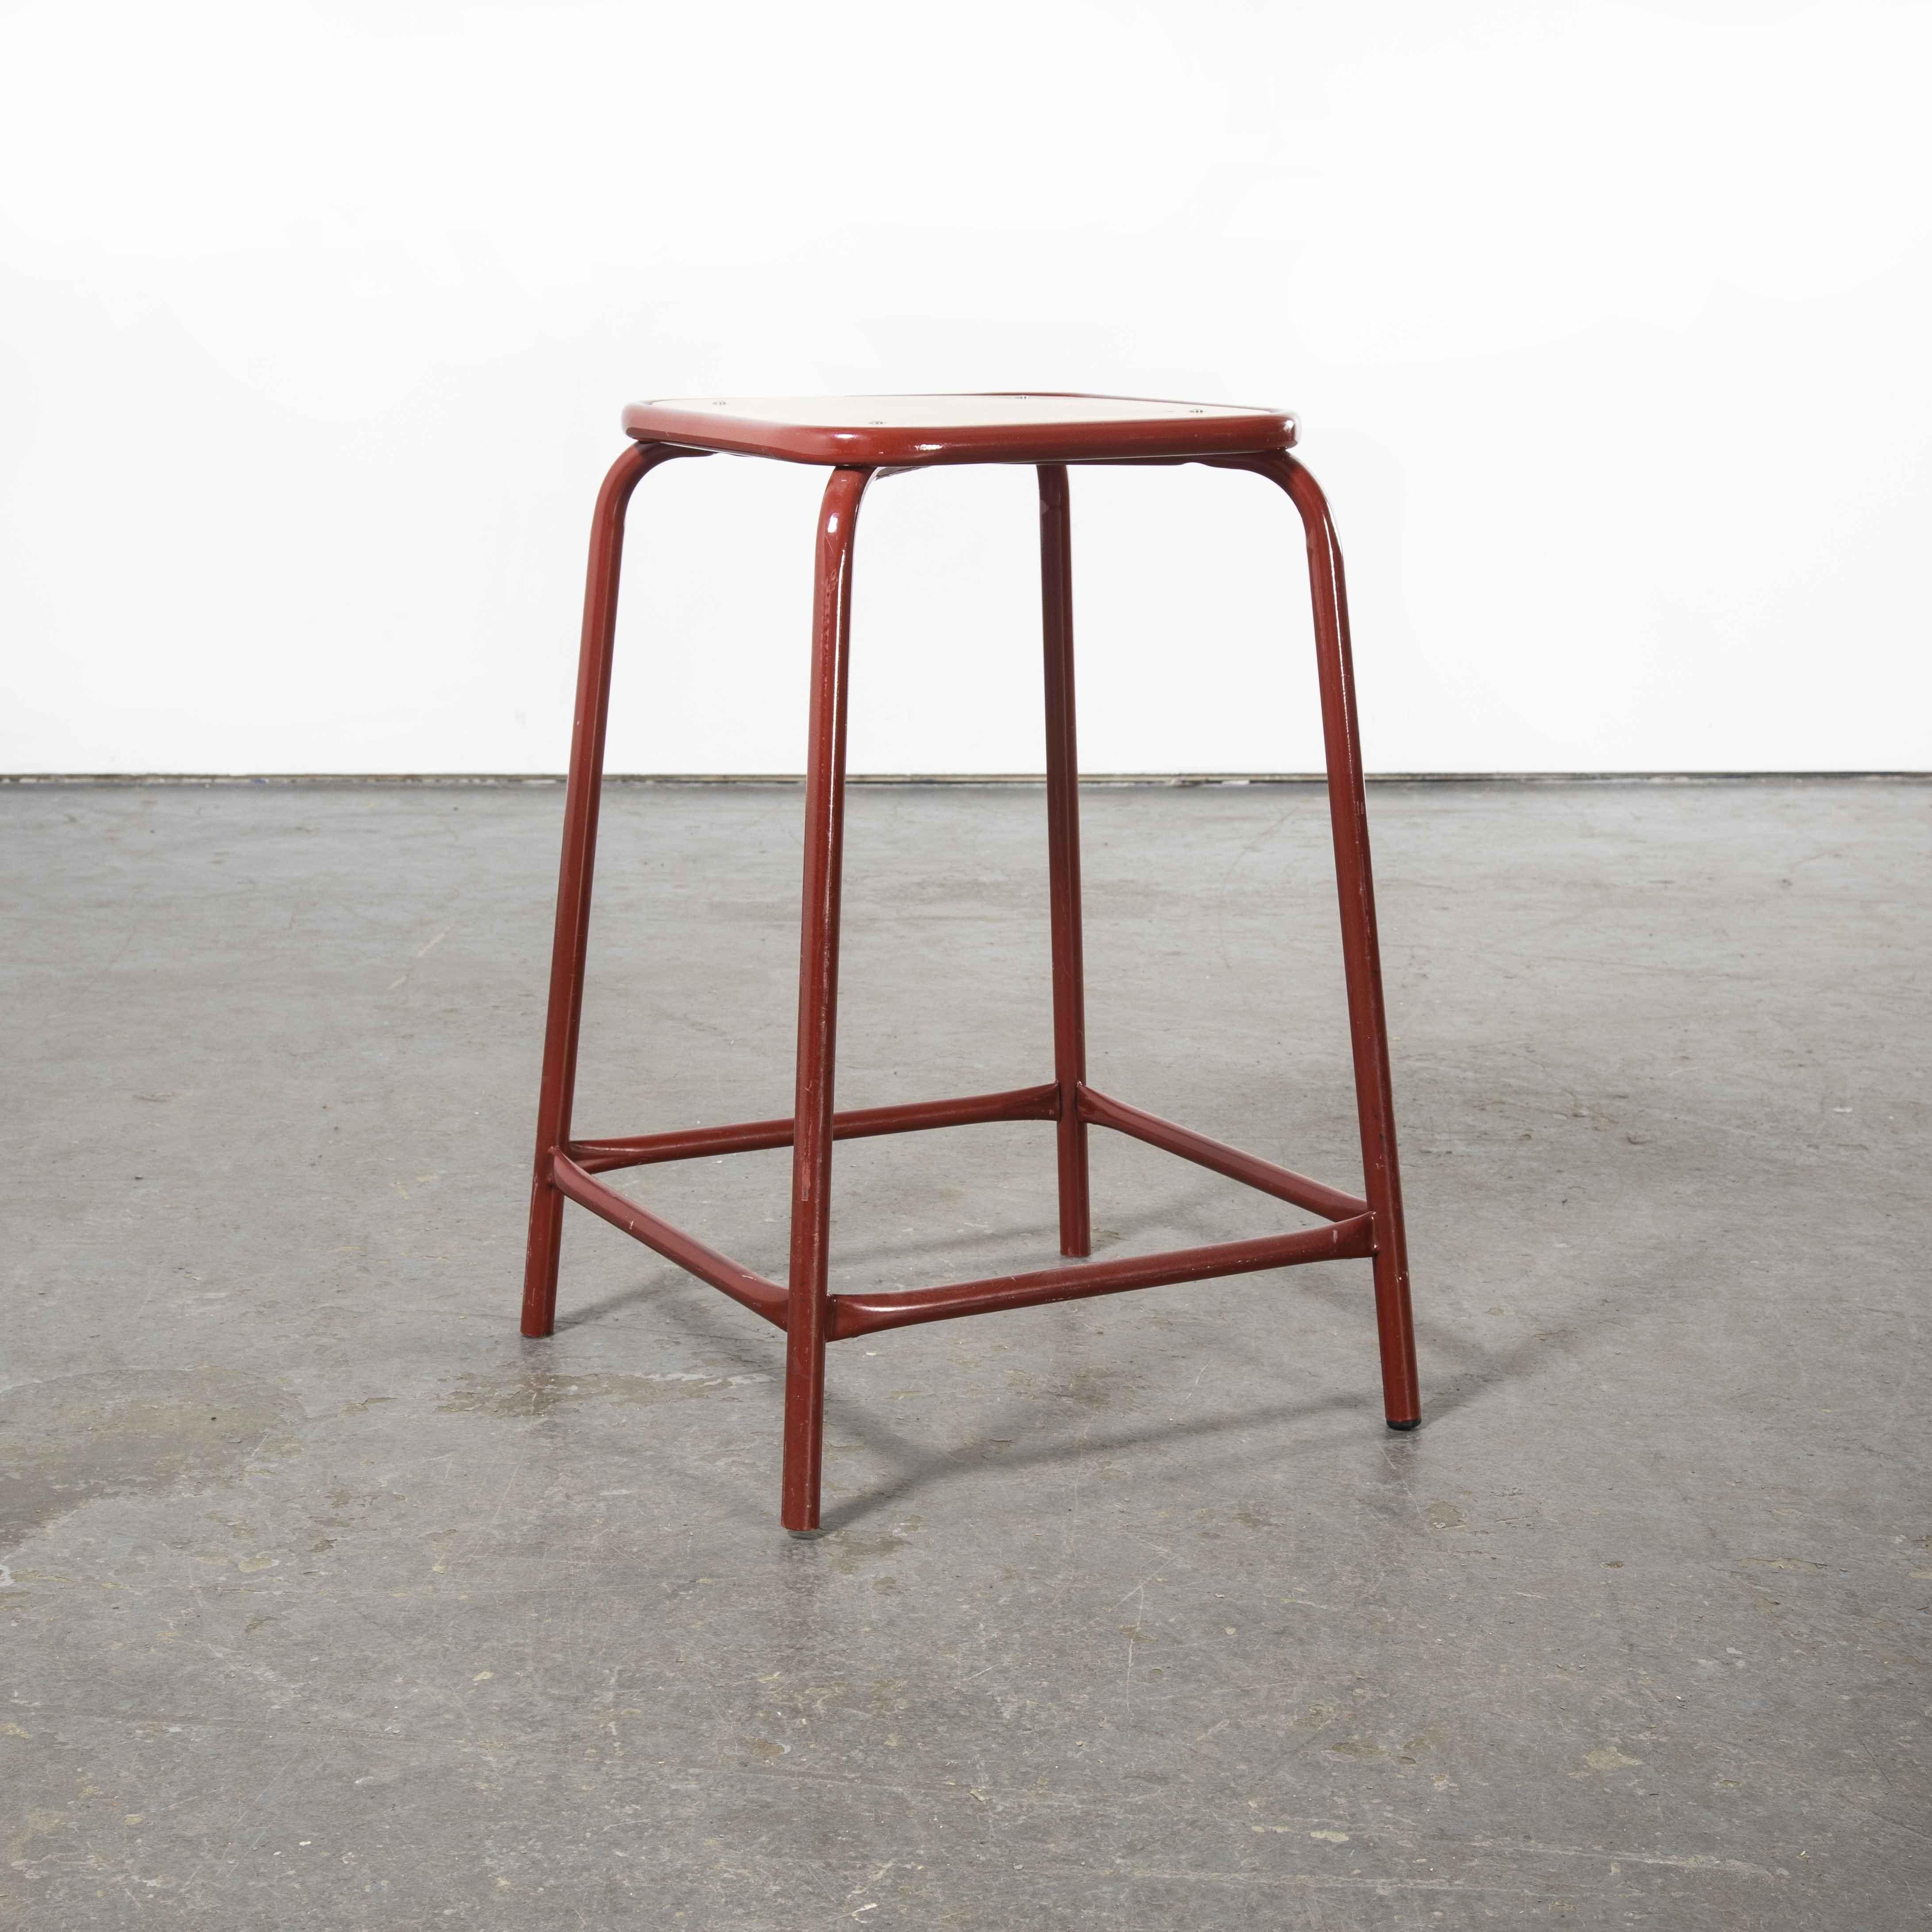 1970’s French dark red laboratory stools – set of eight

1970’s French dark red laboratory stools – set of eight. Good honest lab stools, heavy steel frames with solid heavy birch ply seats. We clean them and check all fixings, they are good to